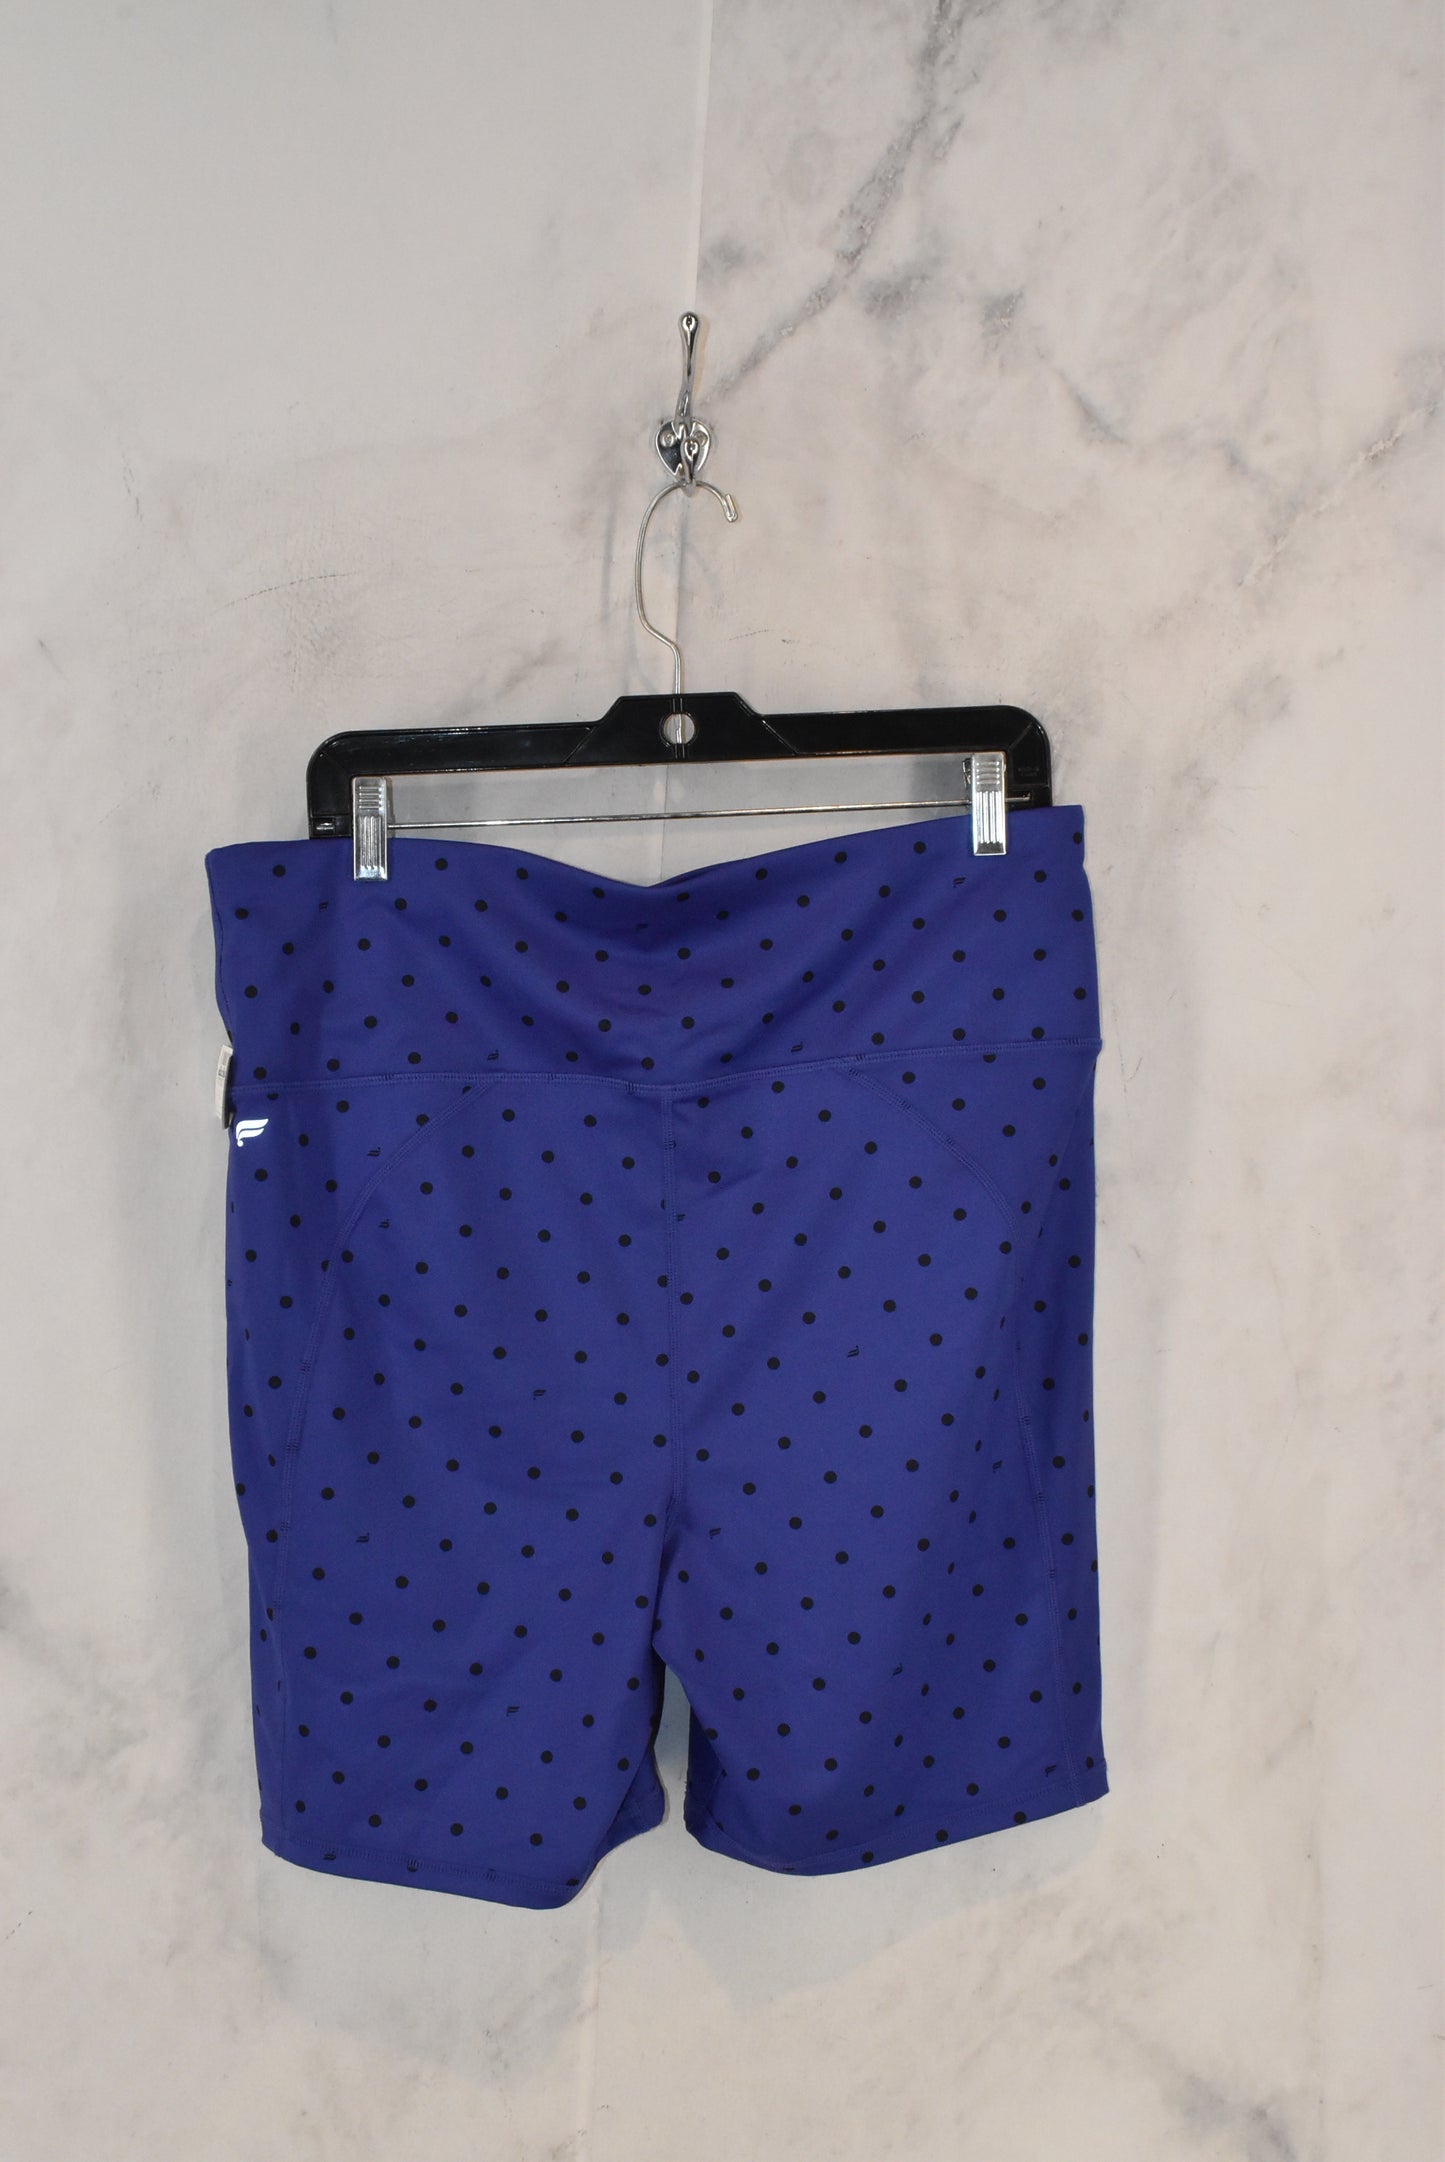 Athletic Shorts By Fabletics  Size: 1x